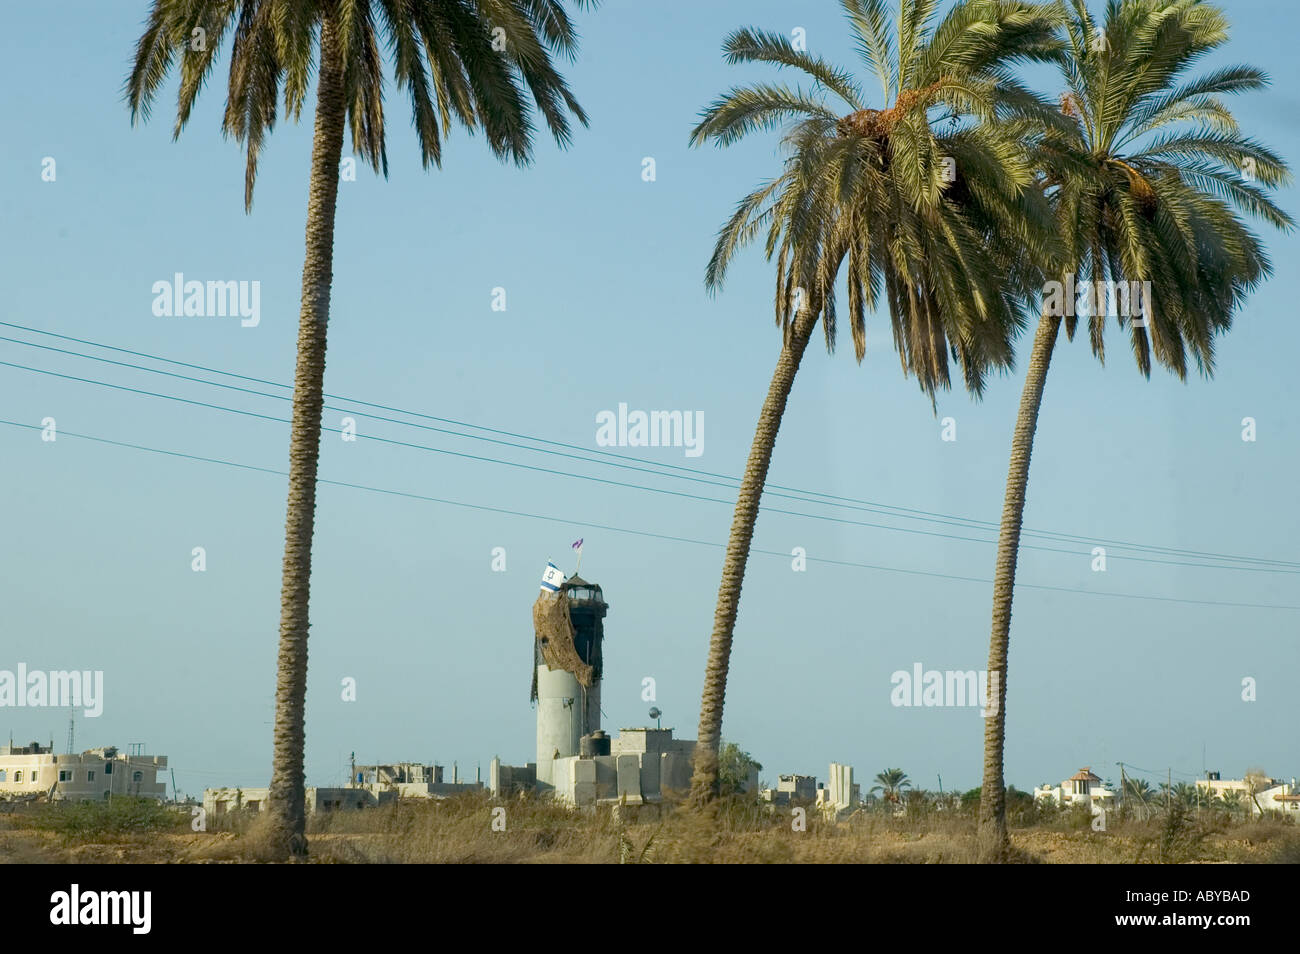 Isarel Gaza strip Gush Katif settlements Kfar Darom palm trees and army mirador aimed at controling the access rod to the settlement Stock Photo